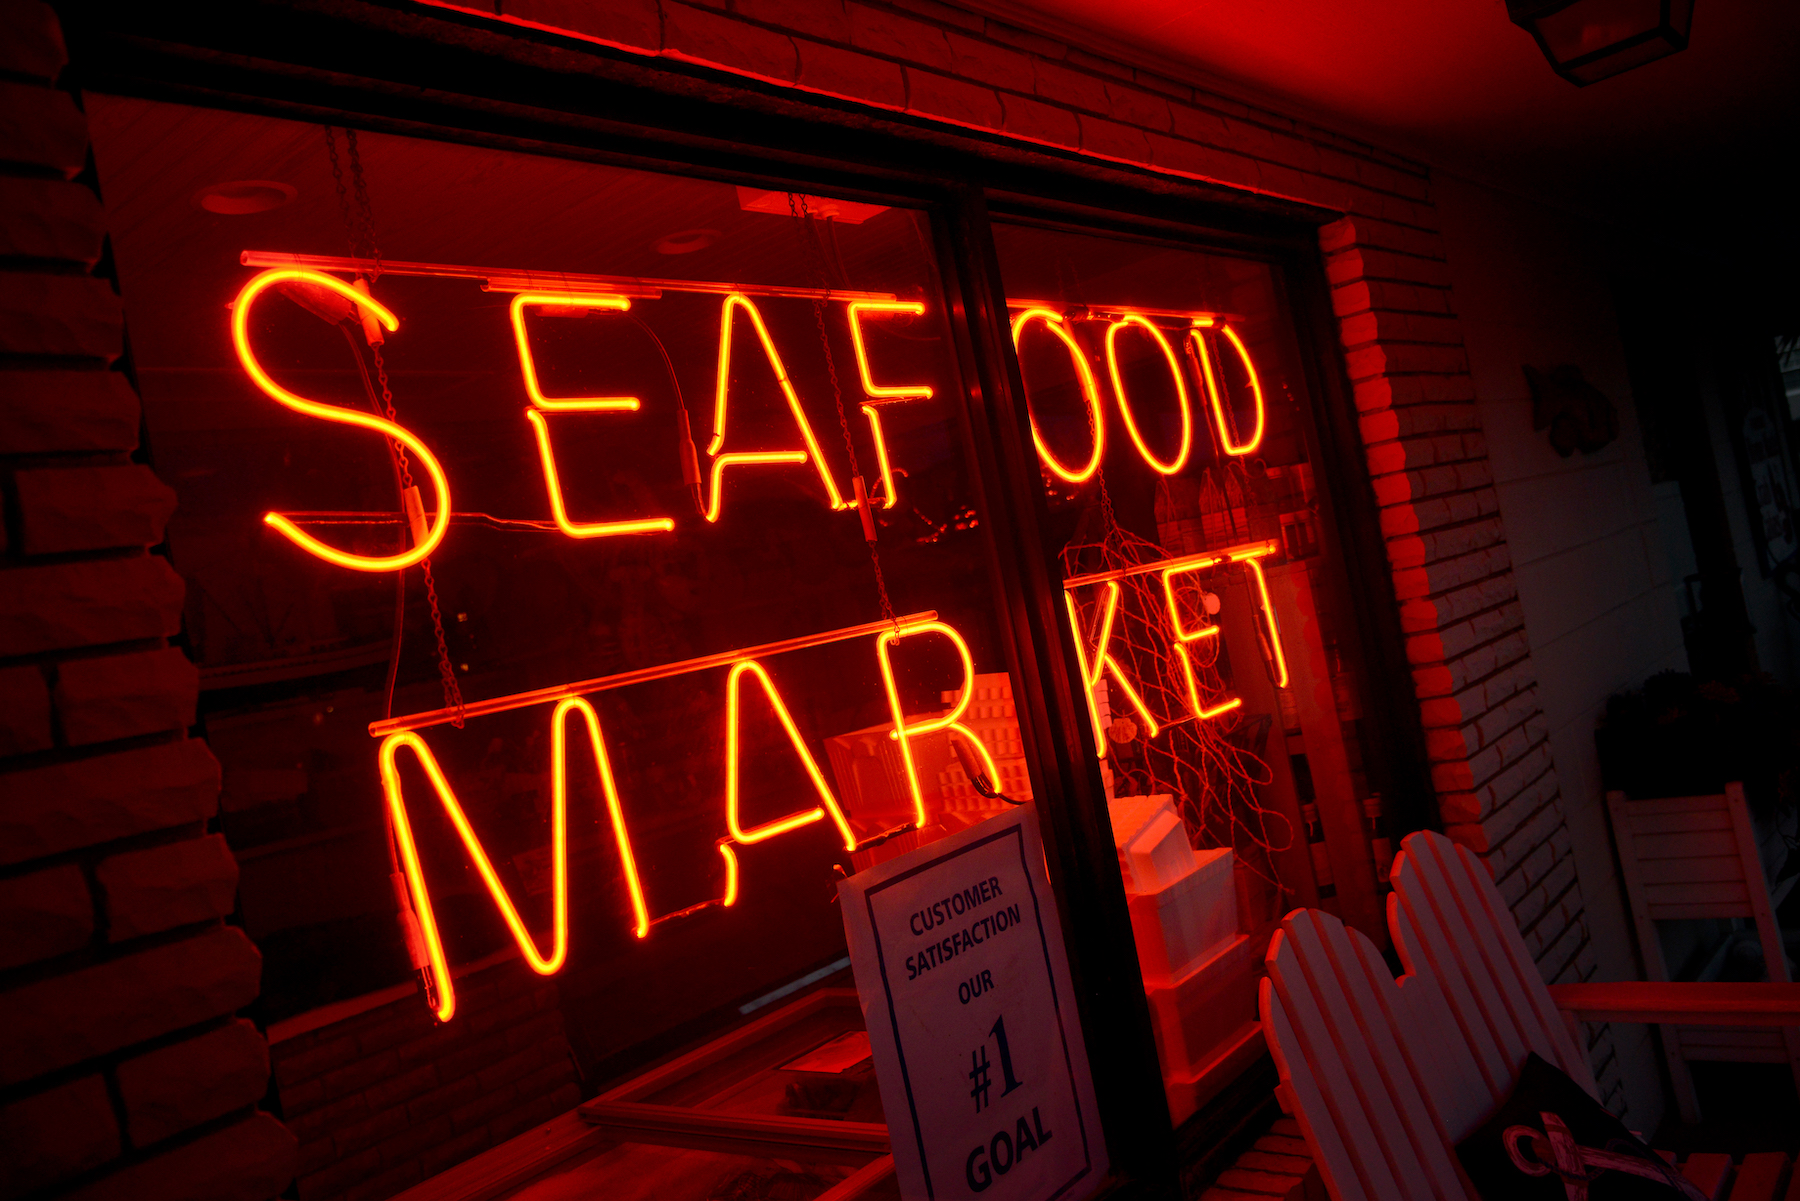 Red neon "Seafood Market" sign outside of a restaurant. 